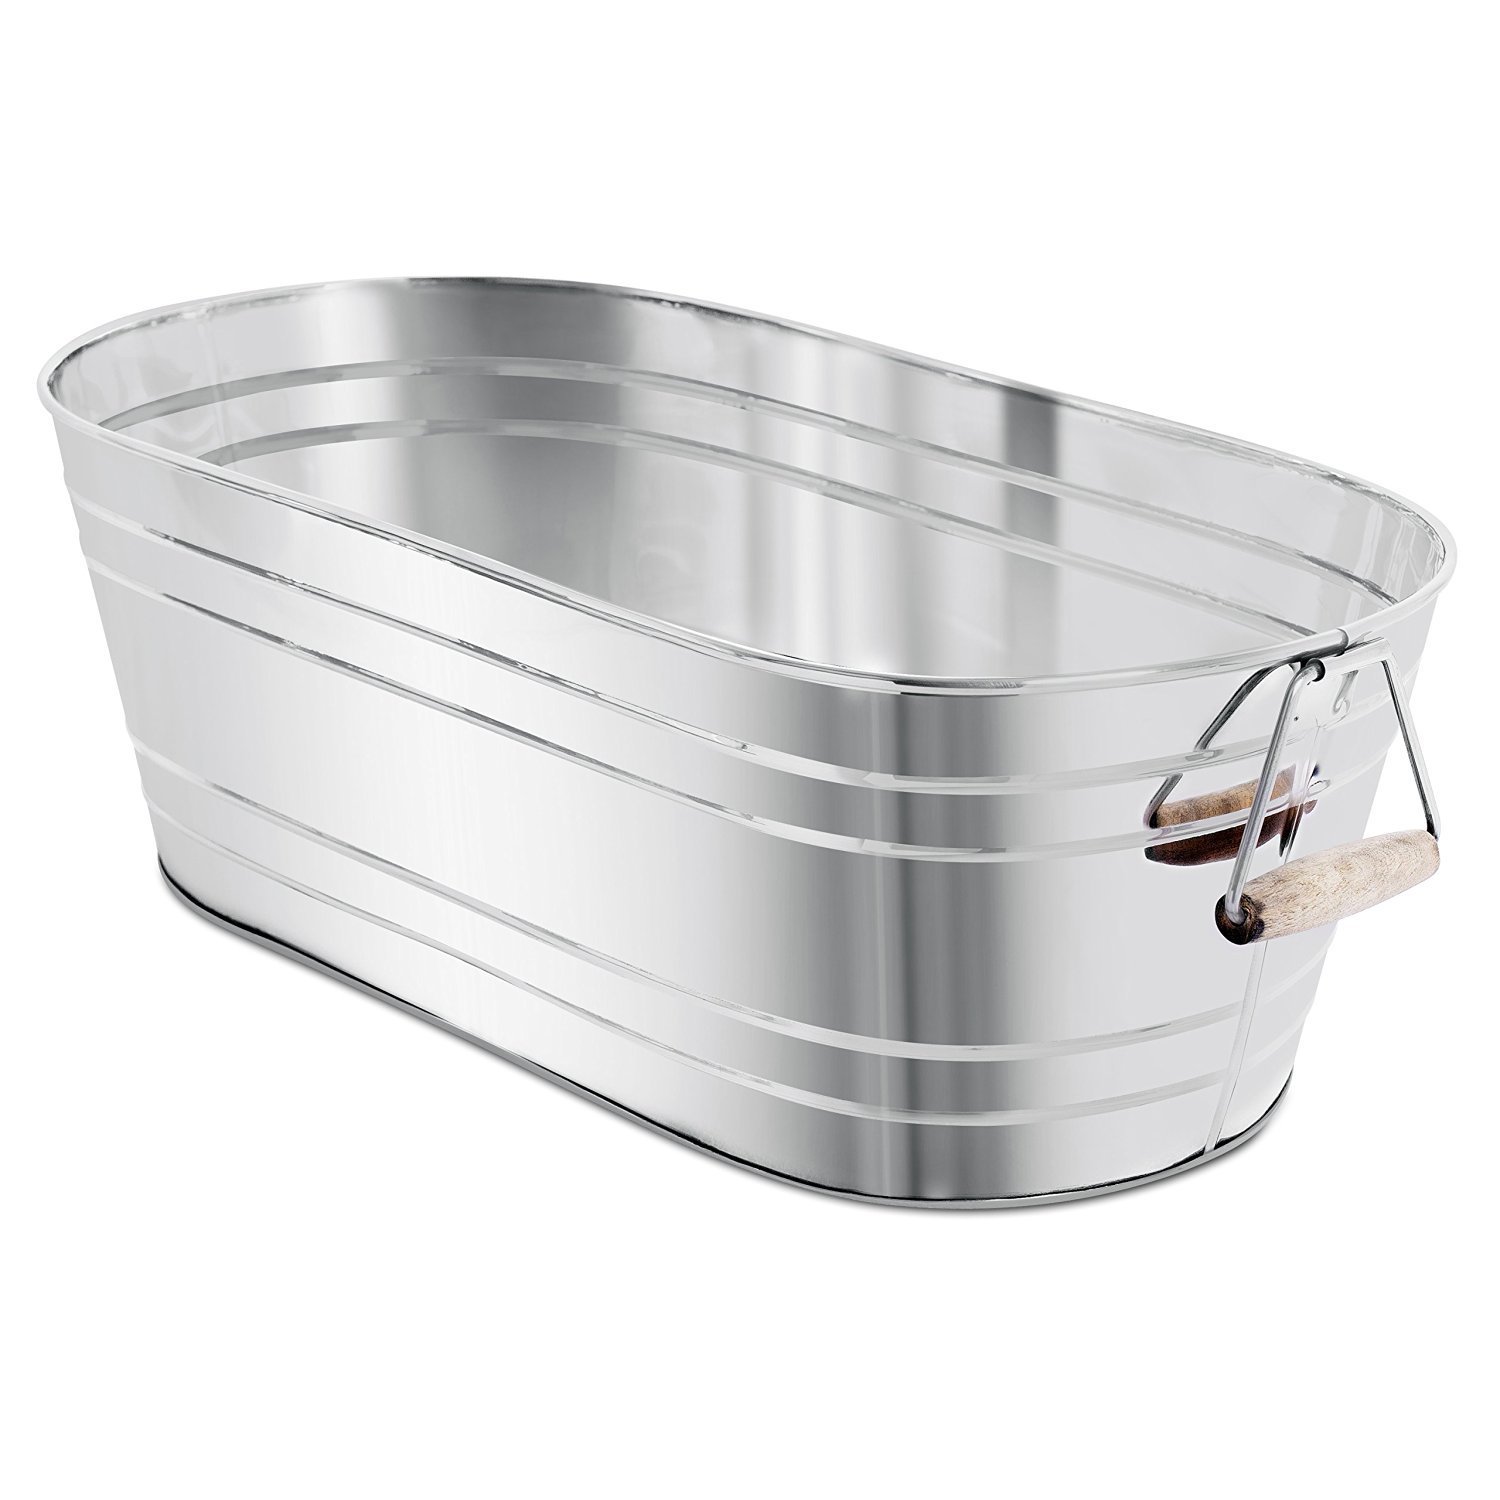 https://ak1.ostkcdn.com/images/products/12779010/BirdRock-Home-Stainless-Steel-Beverage-Tub-with-Stand-38906851-9eb0-46b3-805a-4d0a3d136b8c.jpg